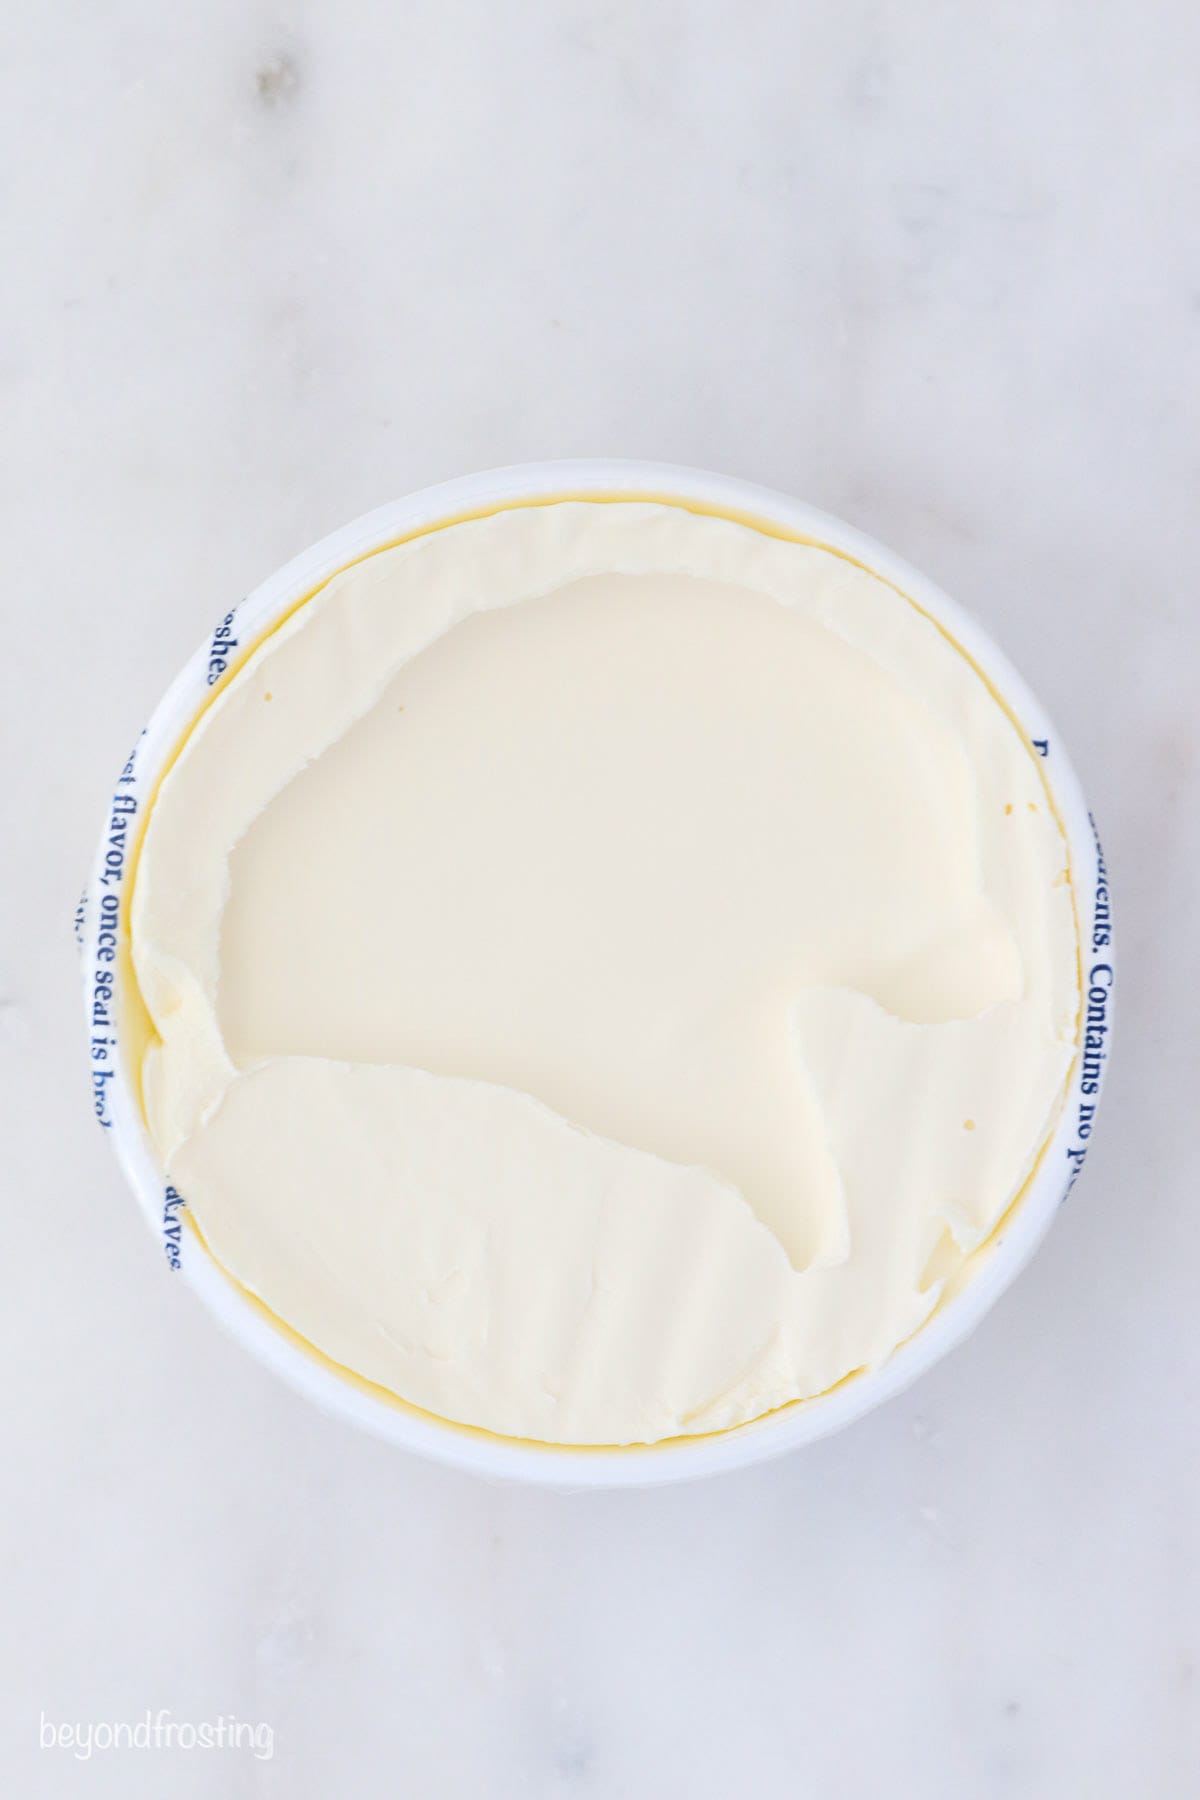 Overhead view of a container of mascarpone cheese.